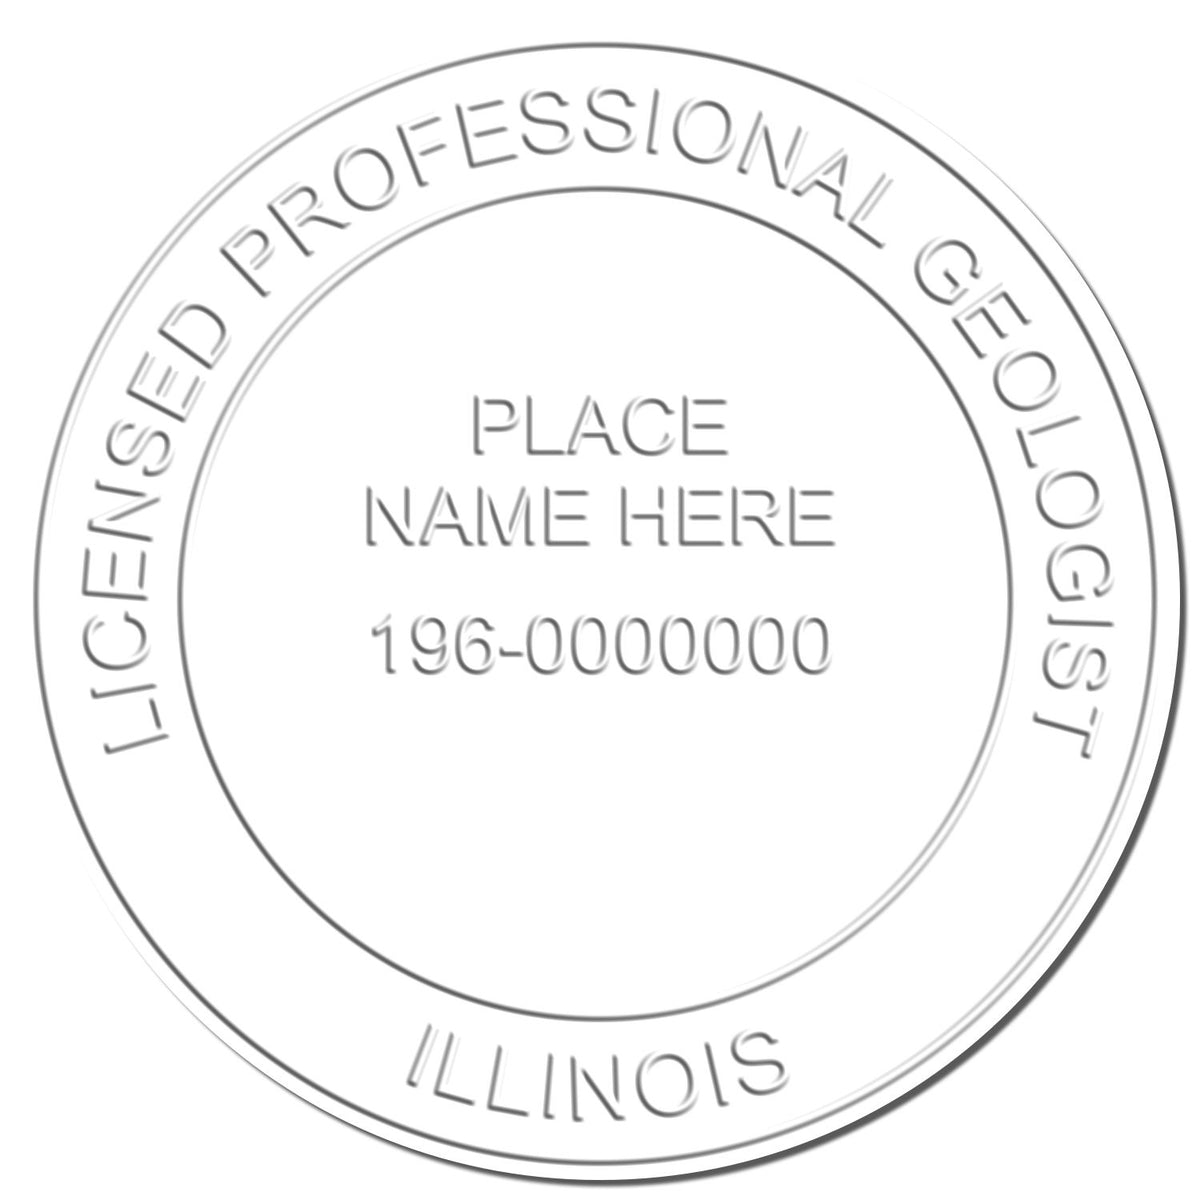 A photograph of the State of Illinois Extended Long Reach Geologist Seal stamp impression reveals a vivid, professional image of the on paper.